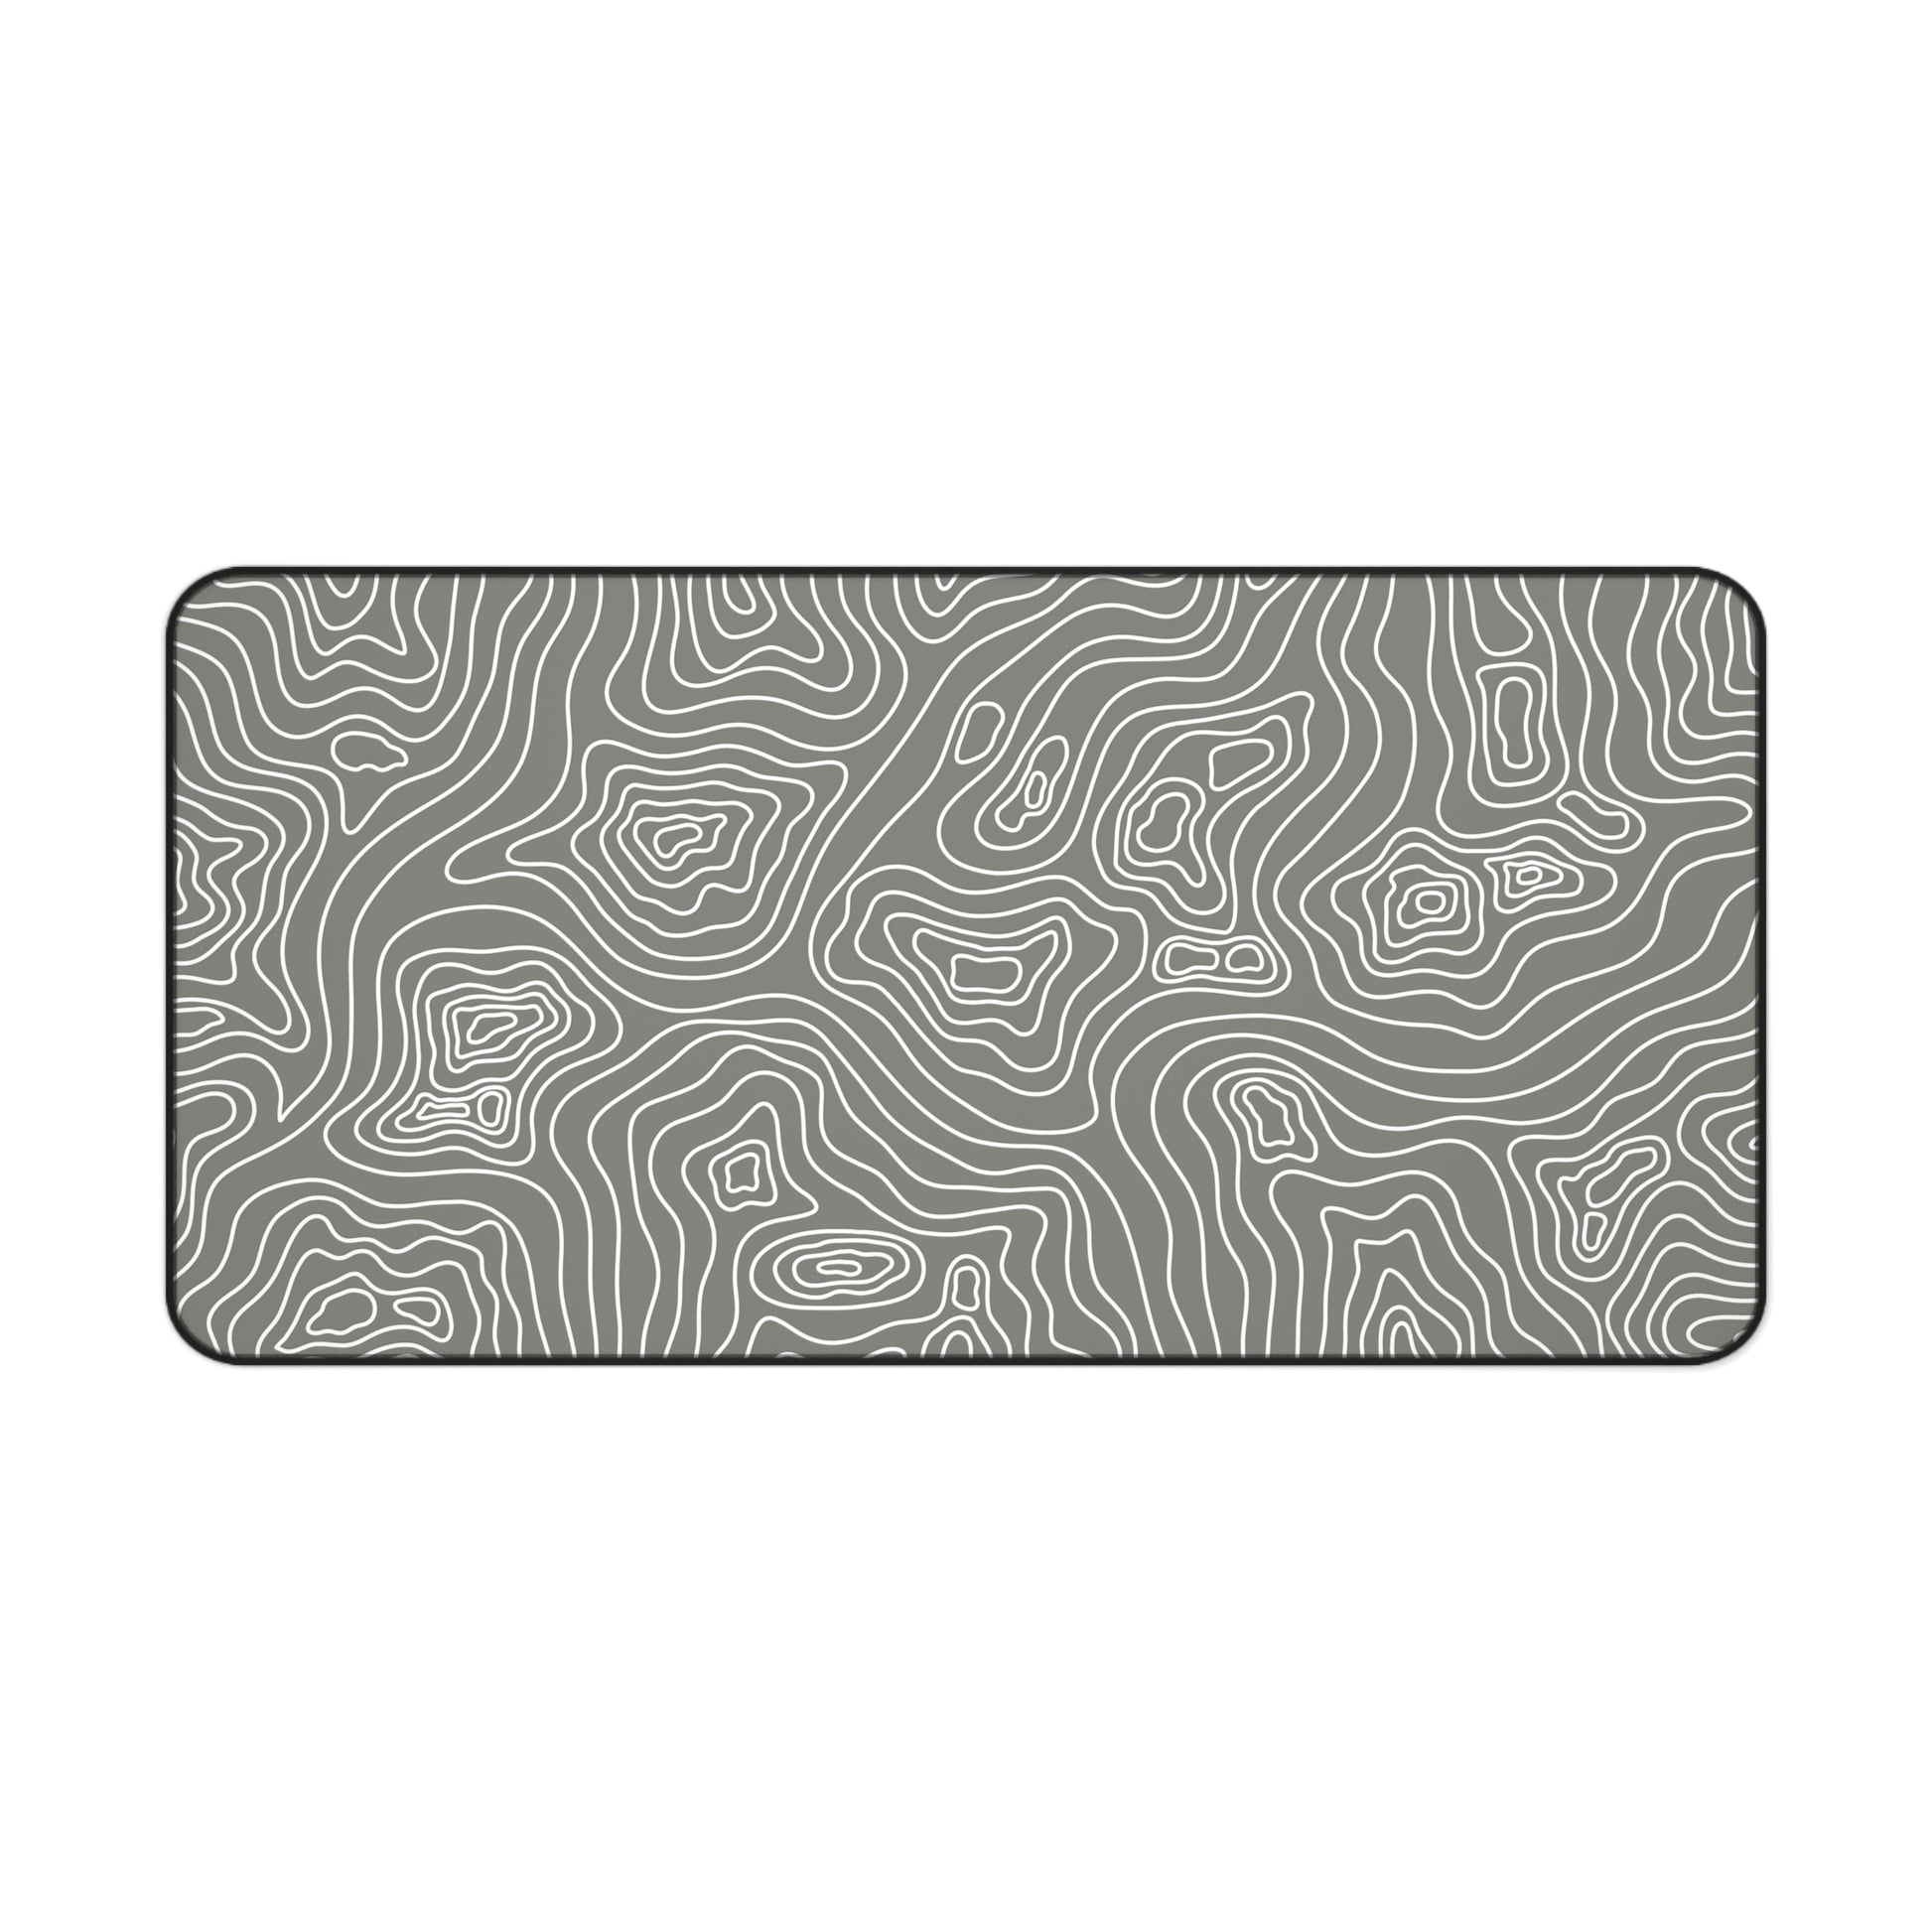 A 31" x 15.5" gray desk mat with white topographic lines.